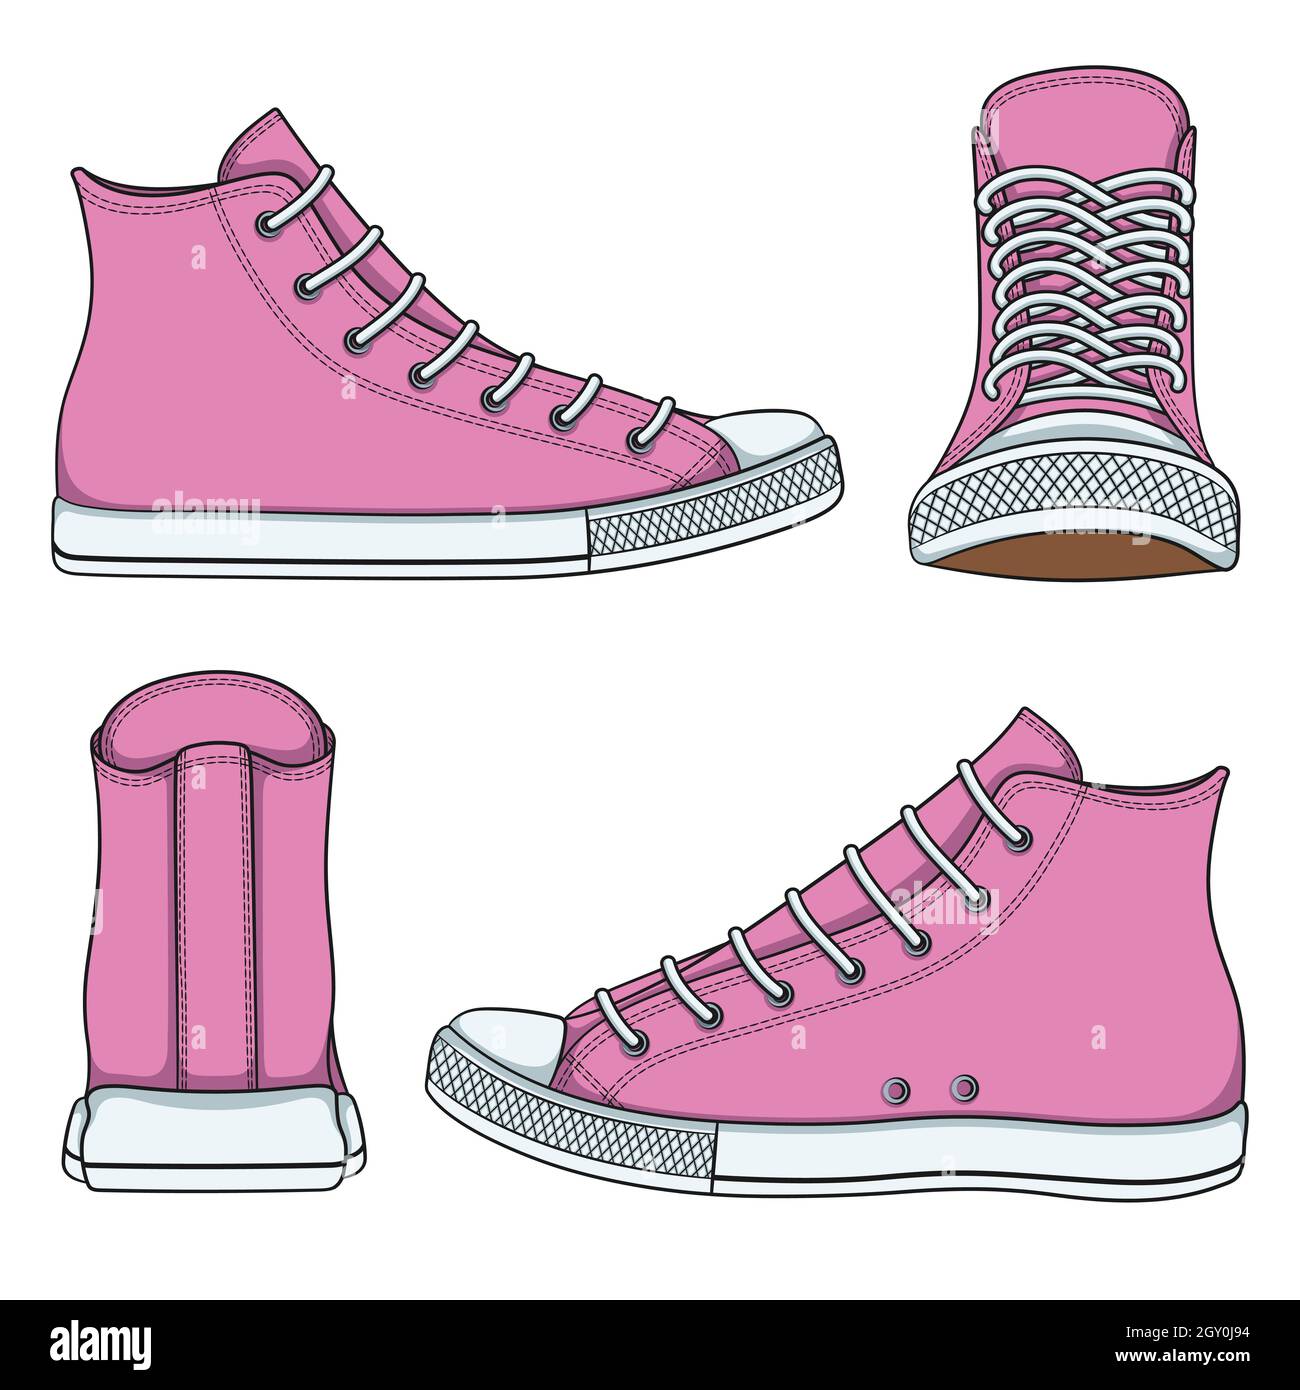 Set of illustrations with pink sneakers. Isolated vector objects on white background. Stock Vector